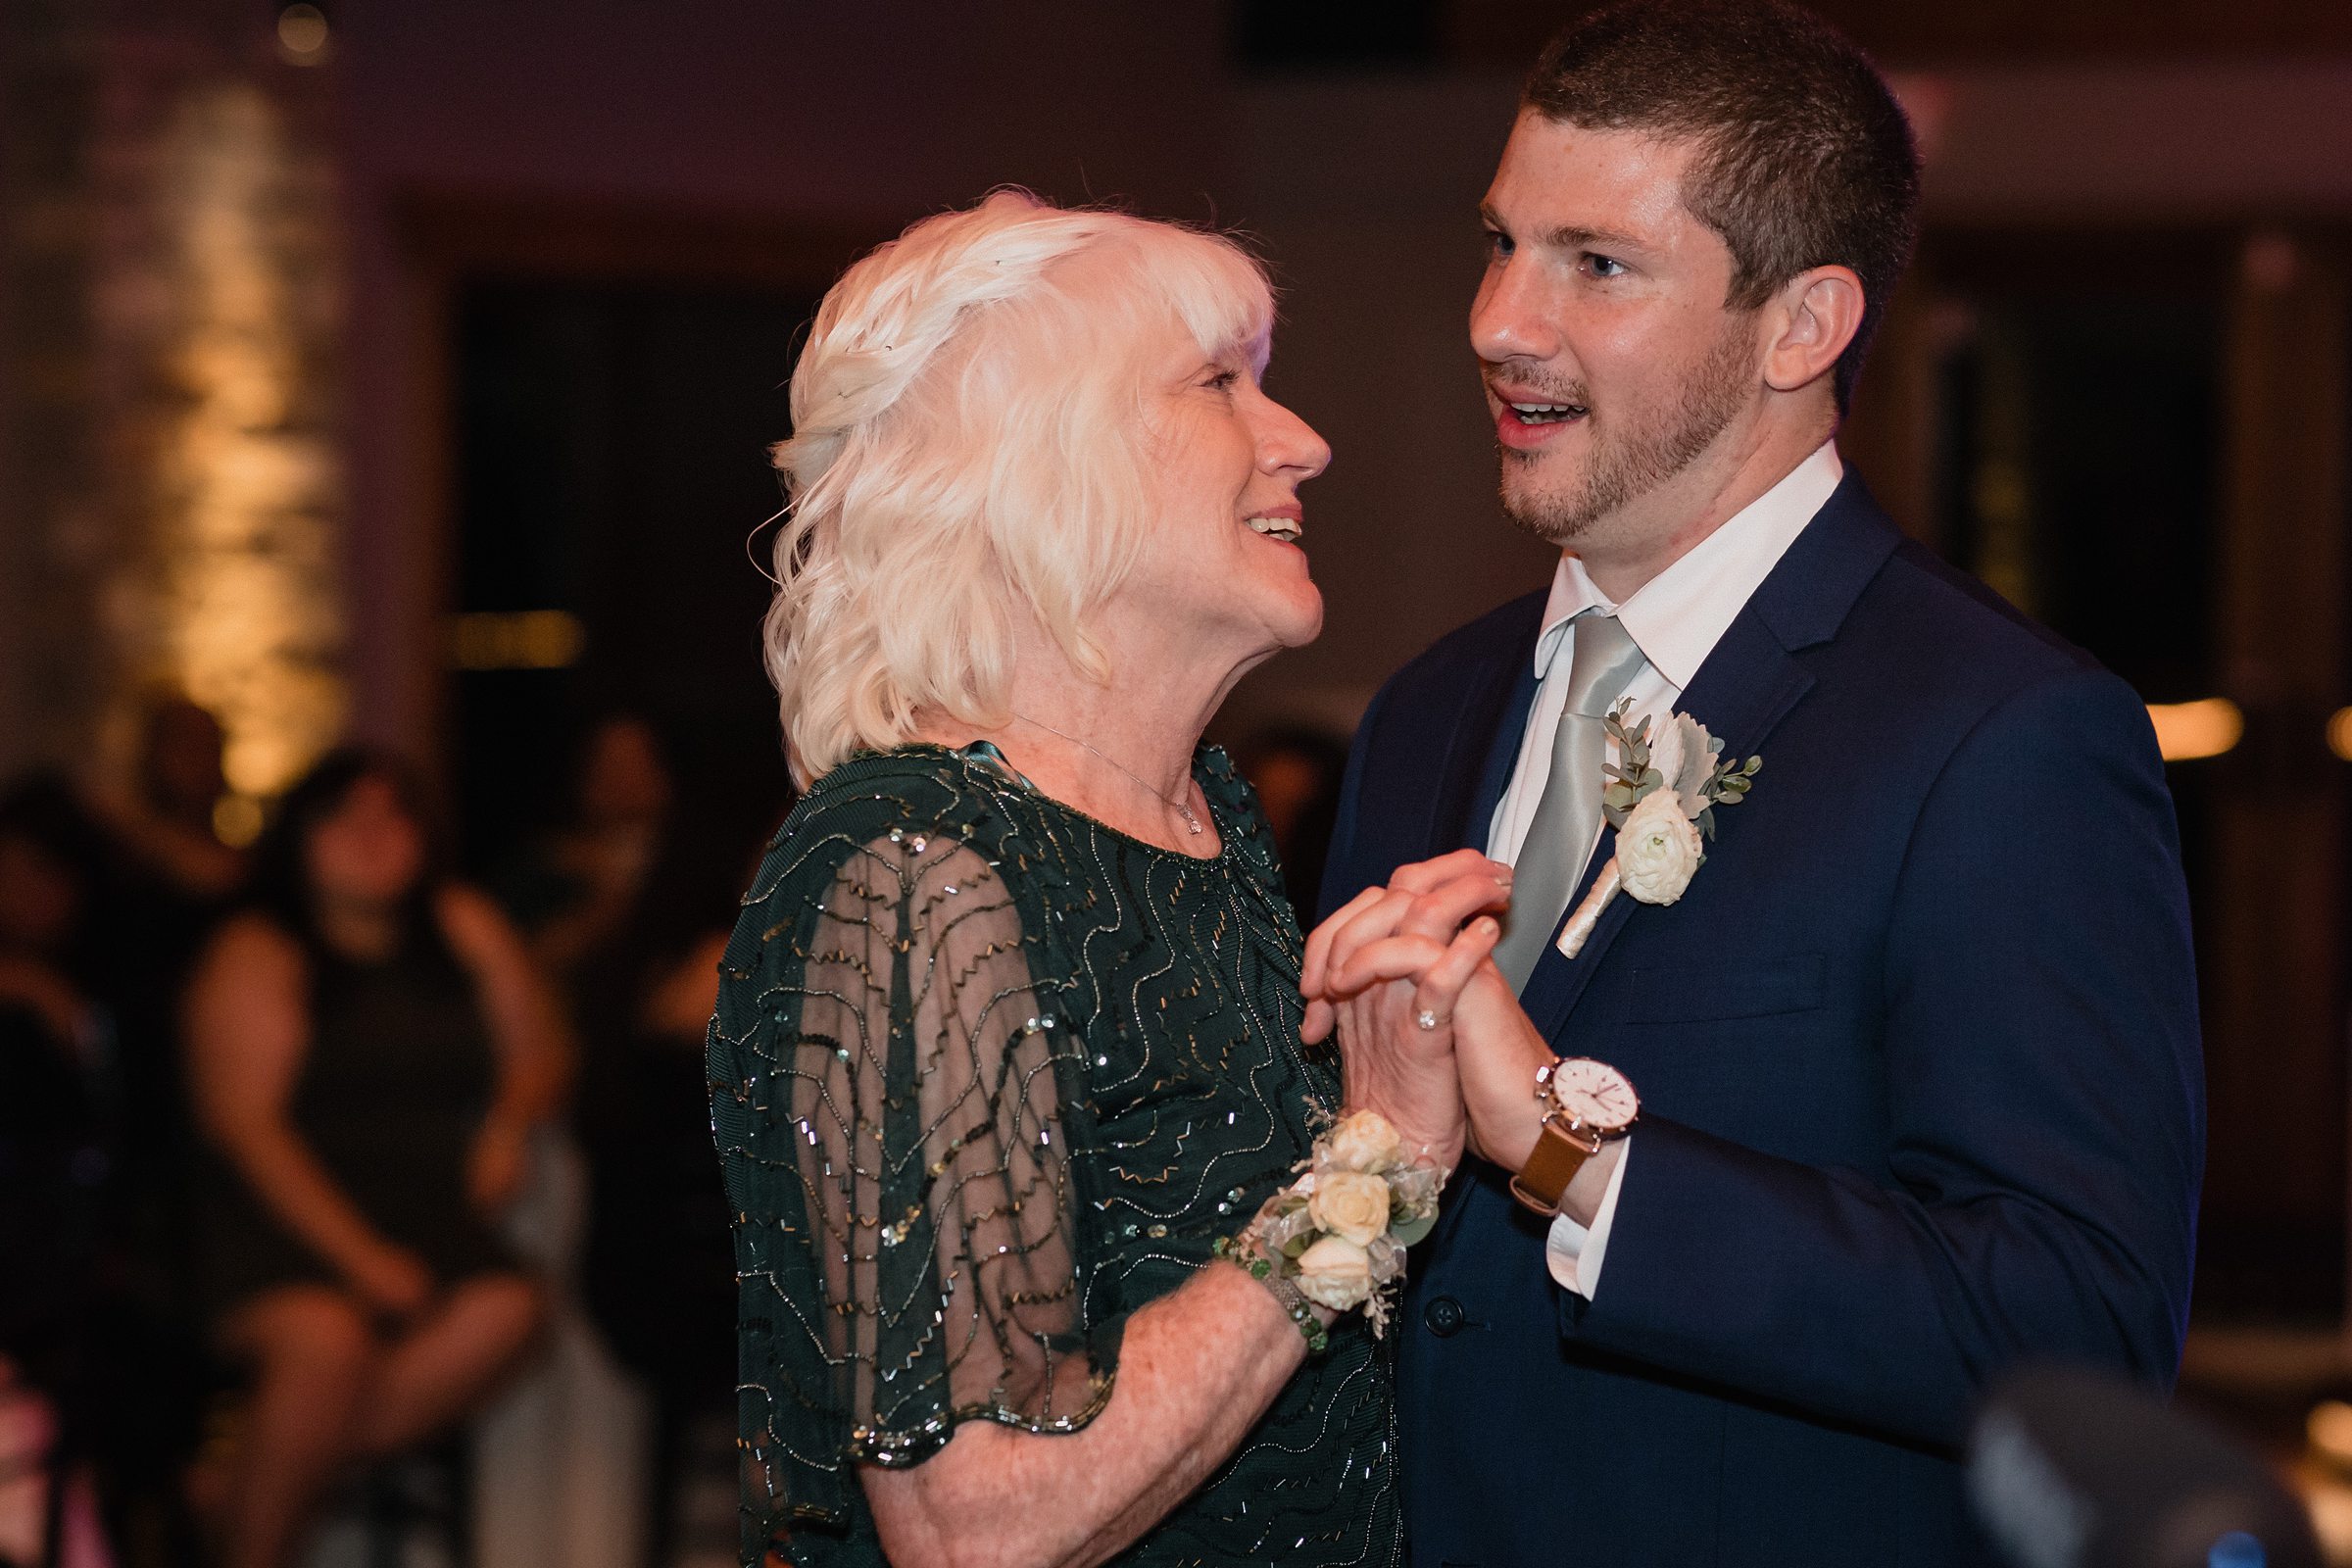 Groom dances with his mom during his wedding at the Fisherman's Inn in Elburn, Illinois.